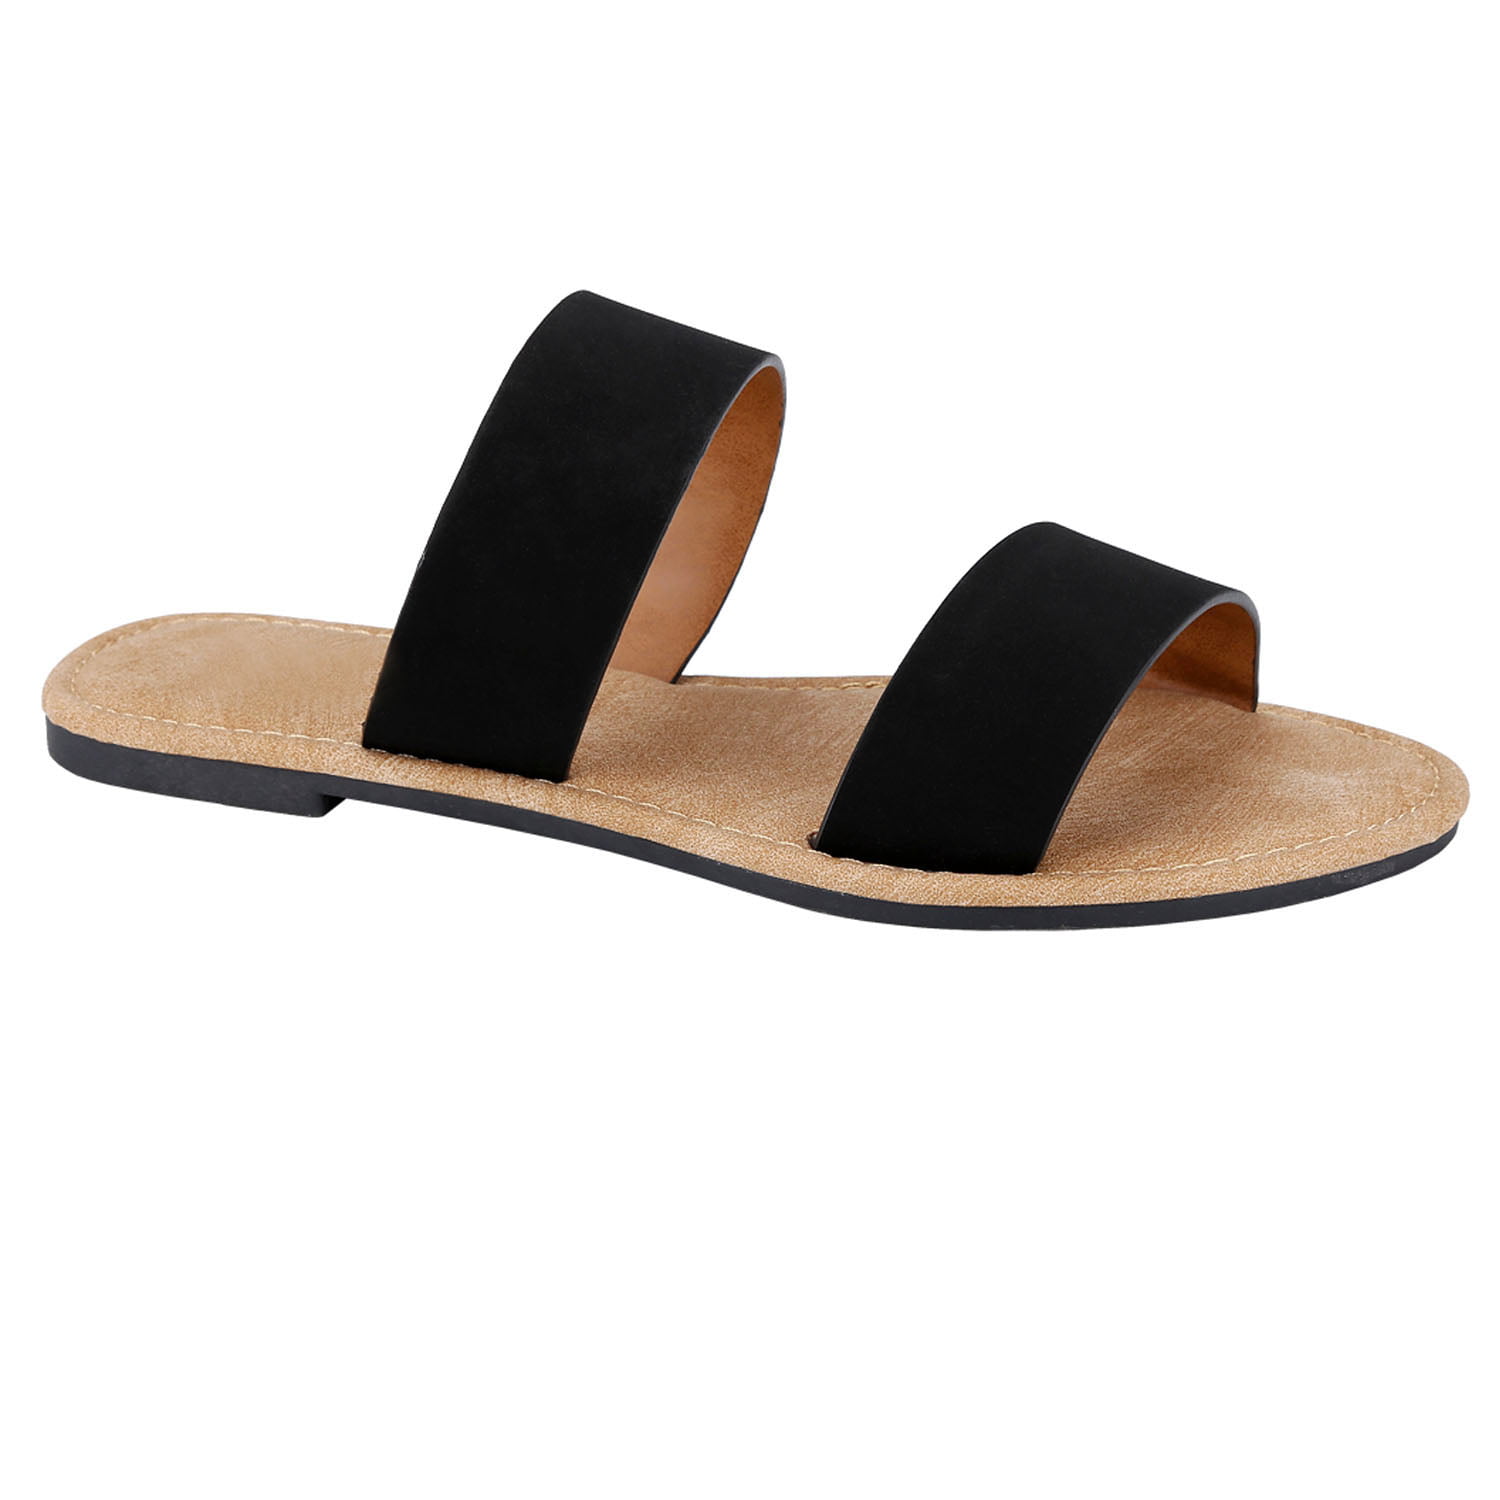 2019 New,Womens Flat Sandals Slides Open Toe Slip On Shoes,Ladies Summer Beach Comfortable Shoes